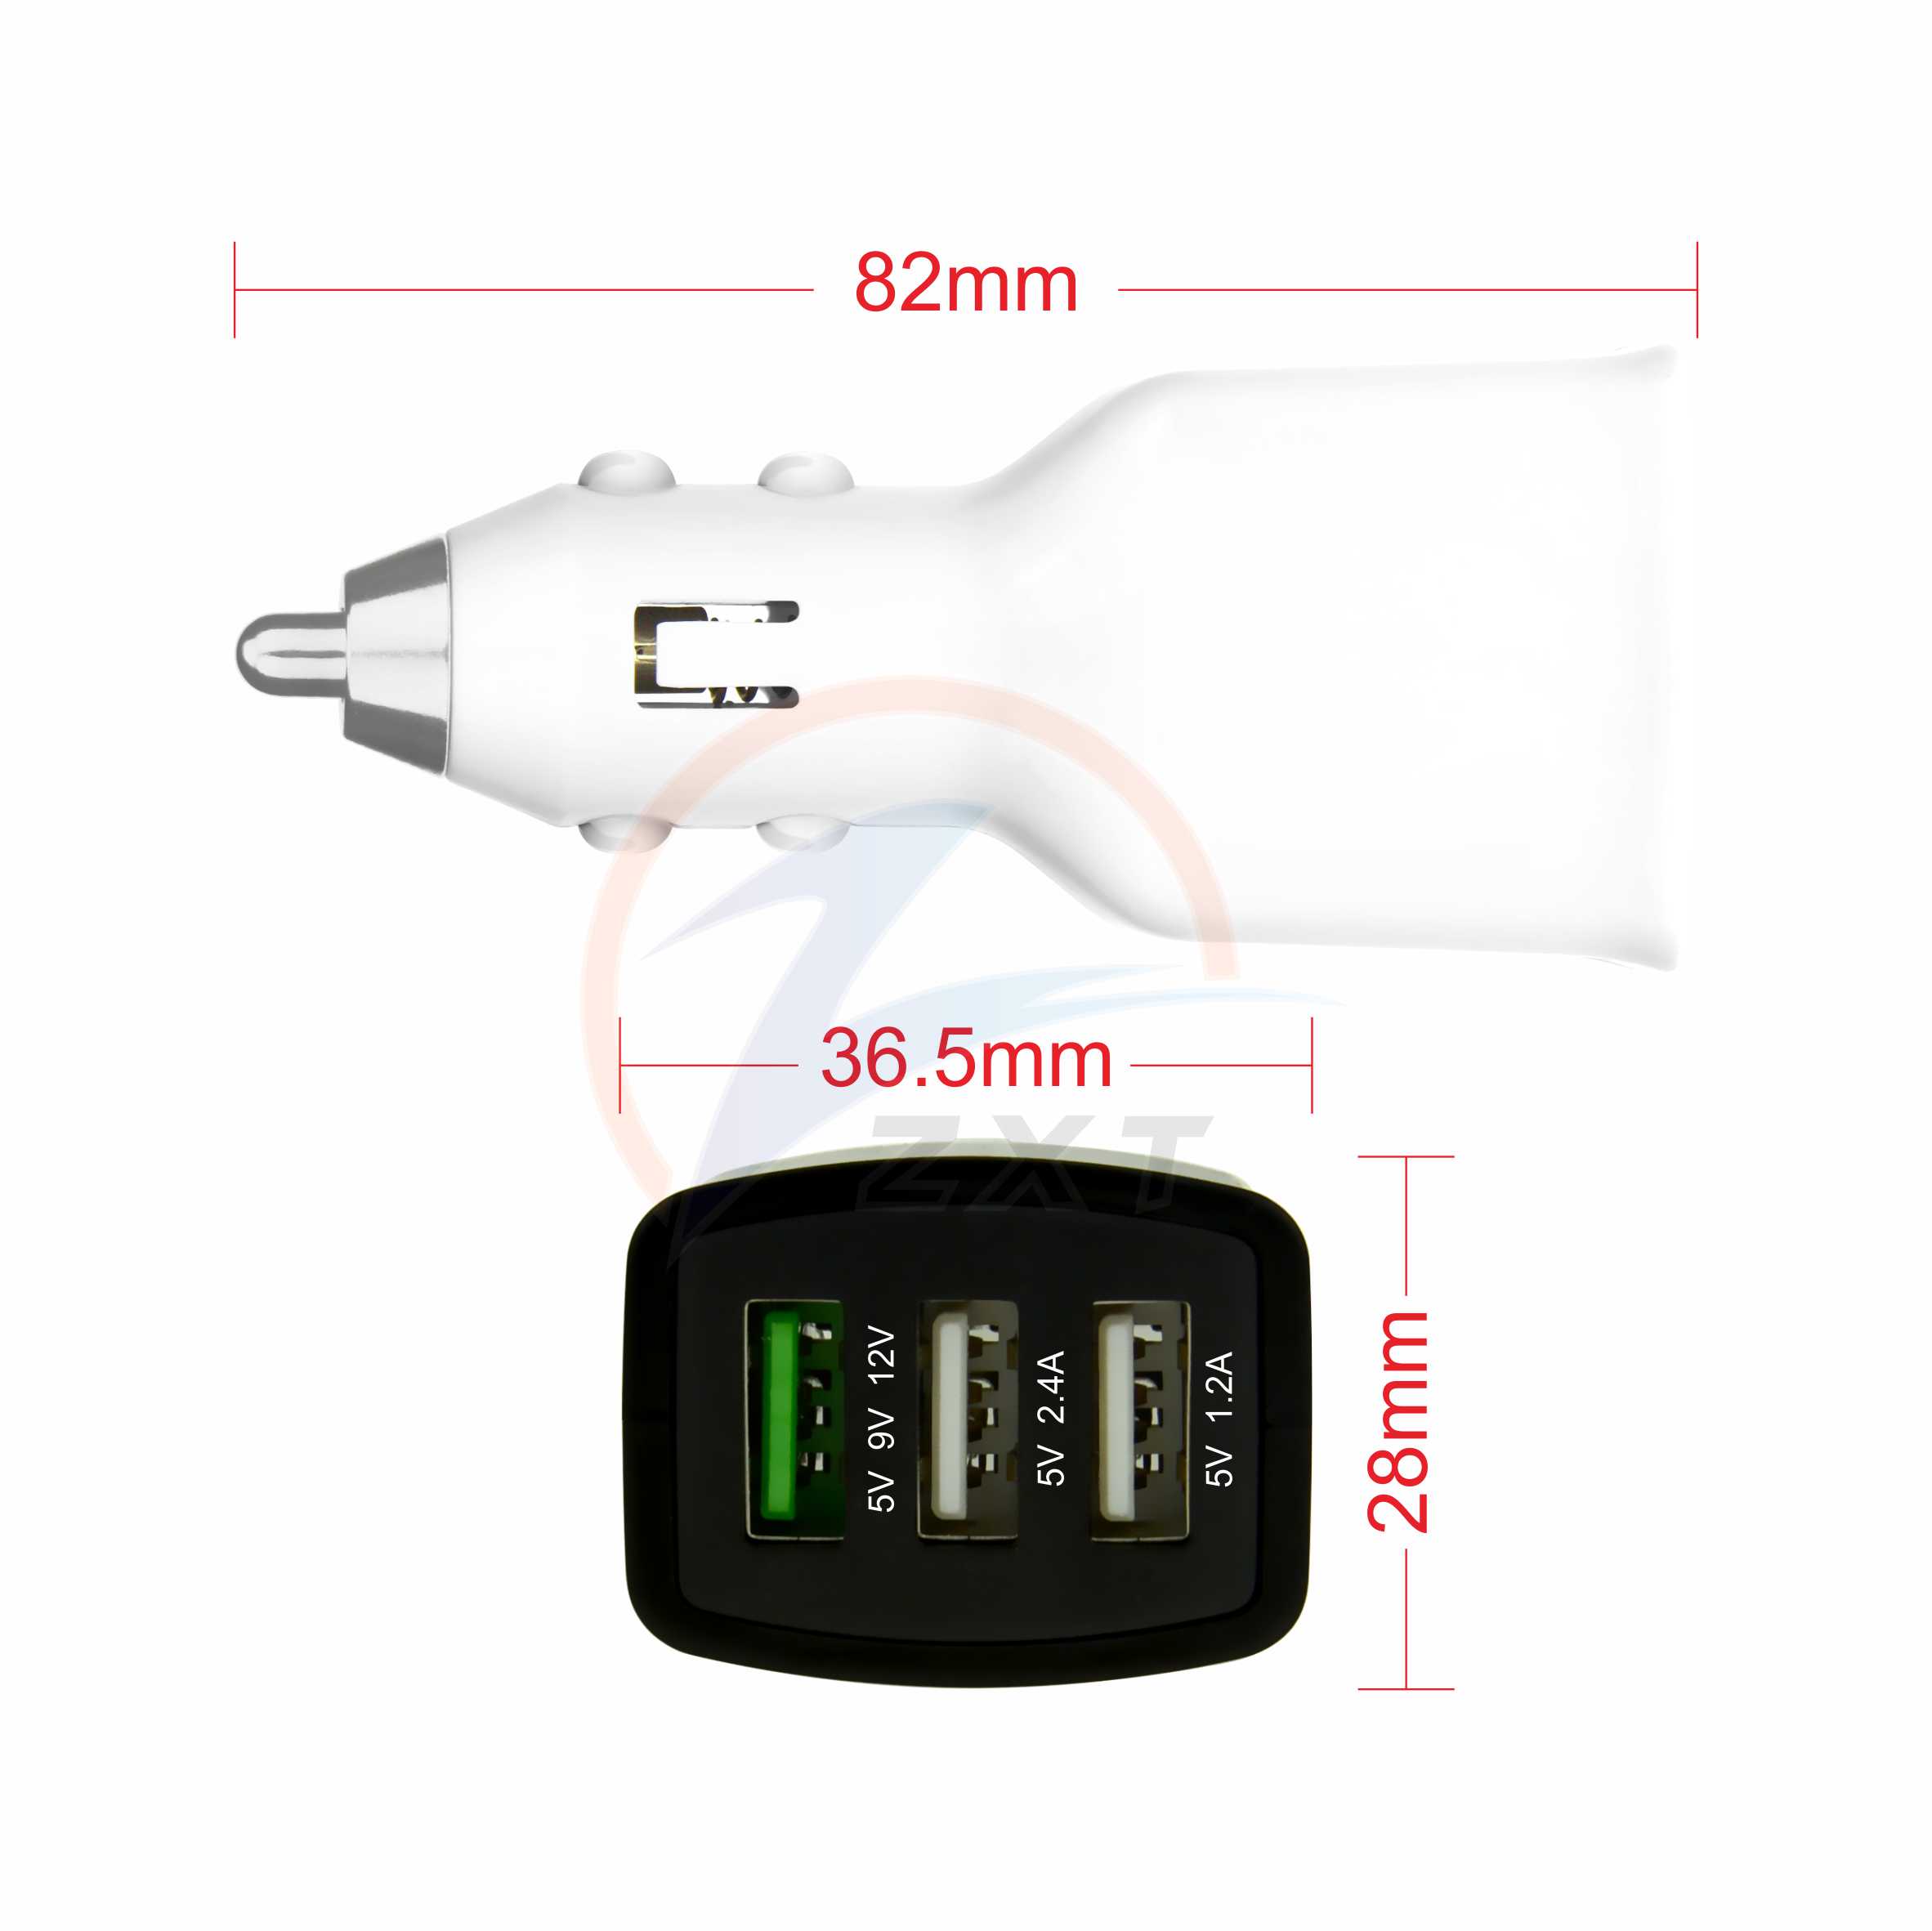 3USB Car Charger ( Fast Port + 2 Normal Ports)